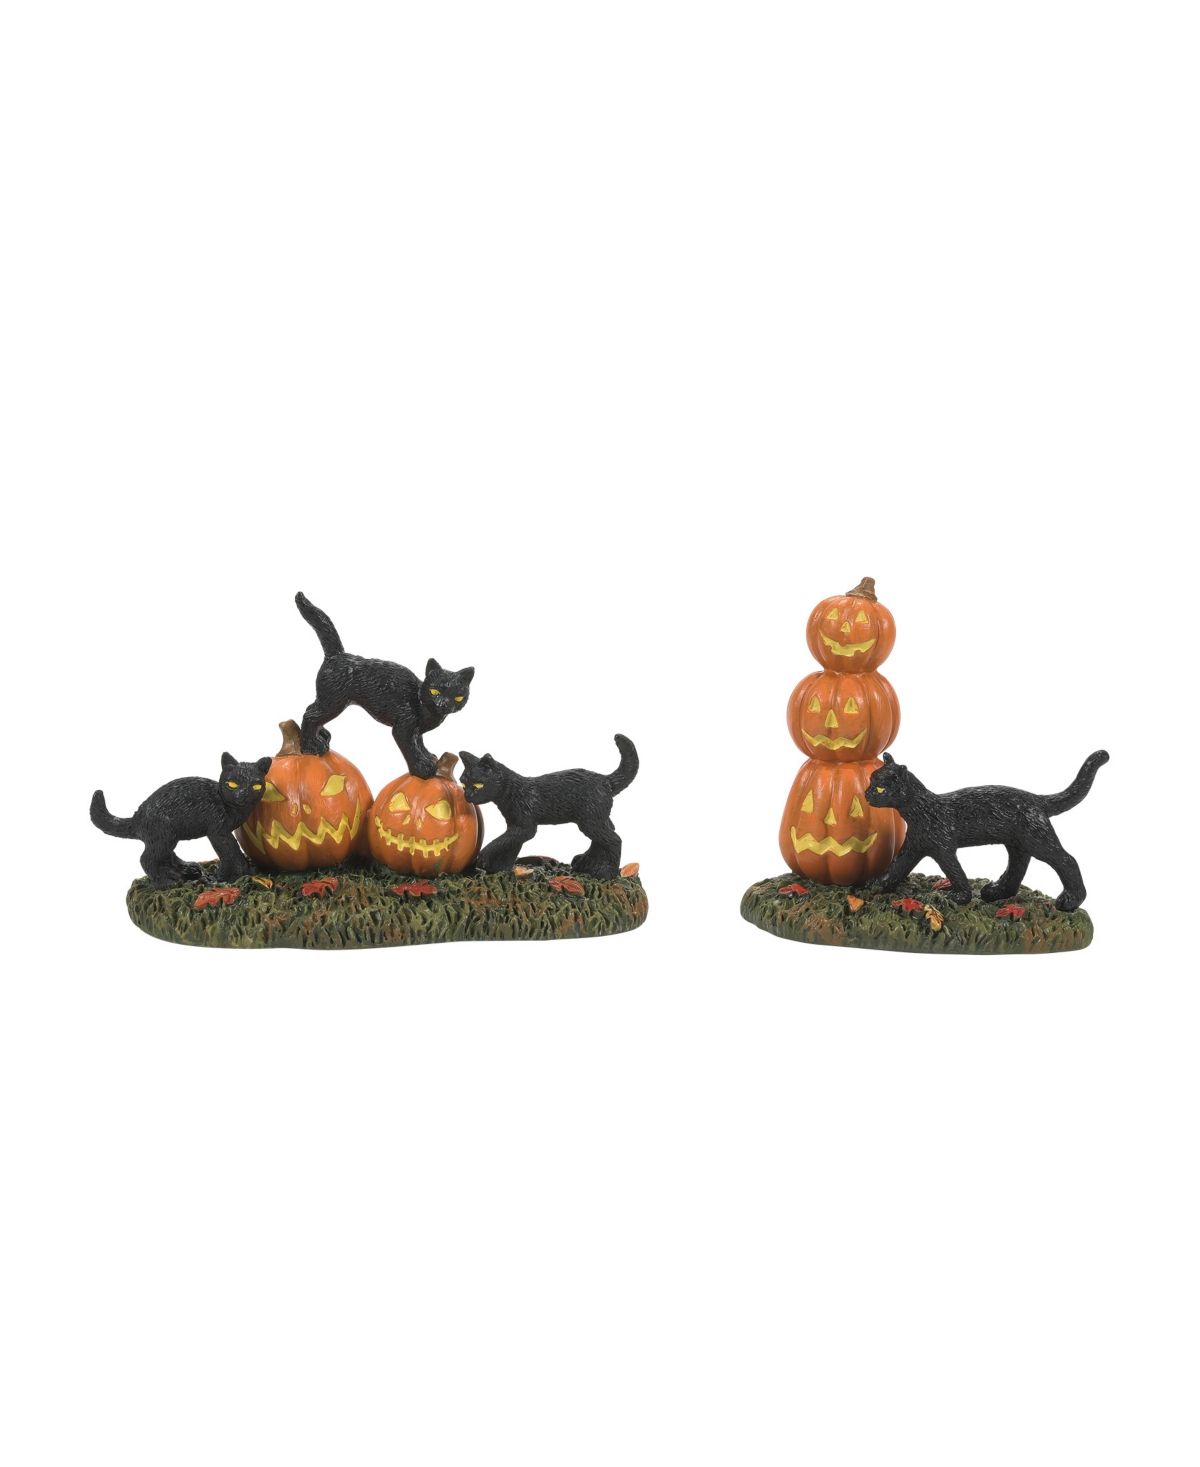 Scary Cats Pumpkins, Set of 2 - Multi